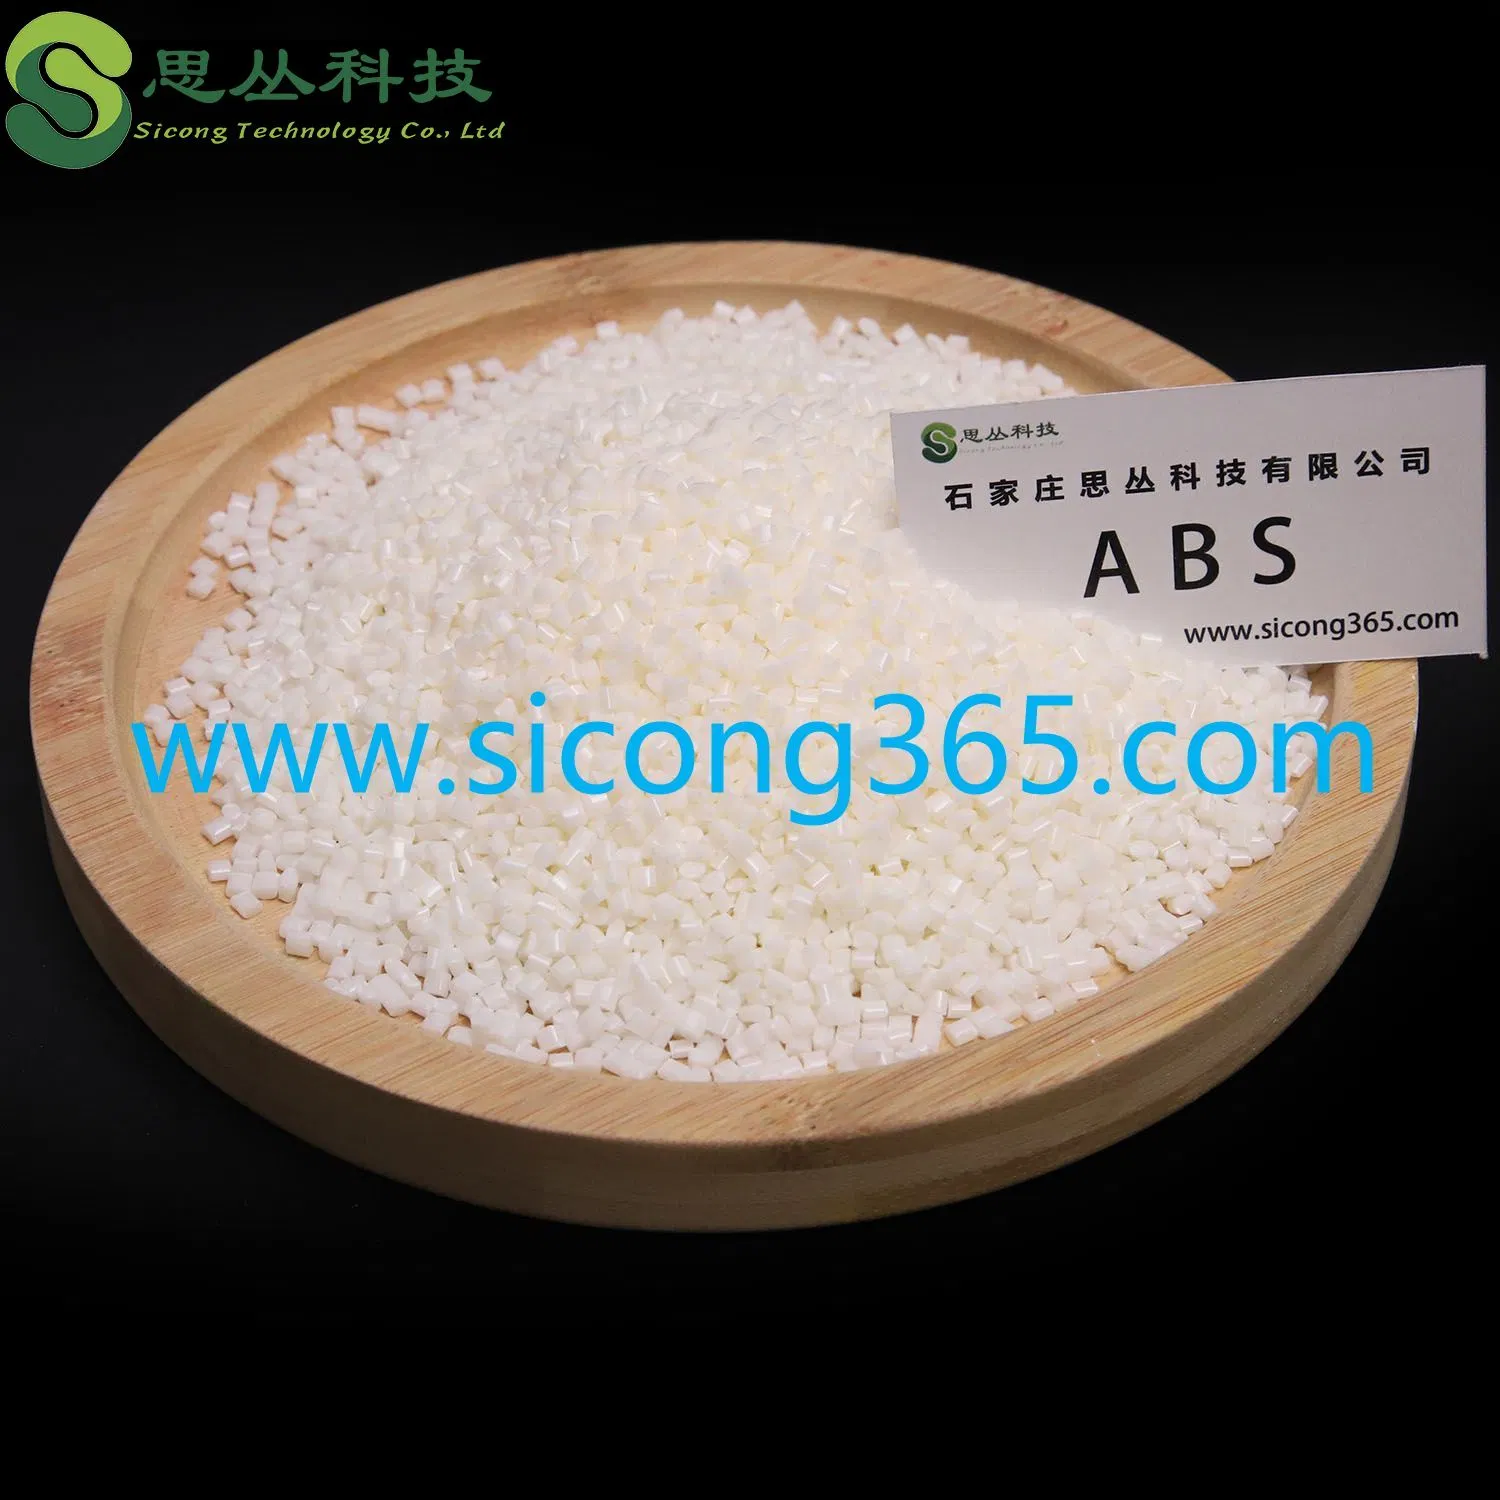 ABS Virgin Granules Flame Retardant ABS Engineer Electronic Application Auto Parts CAS 9003-56-9